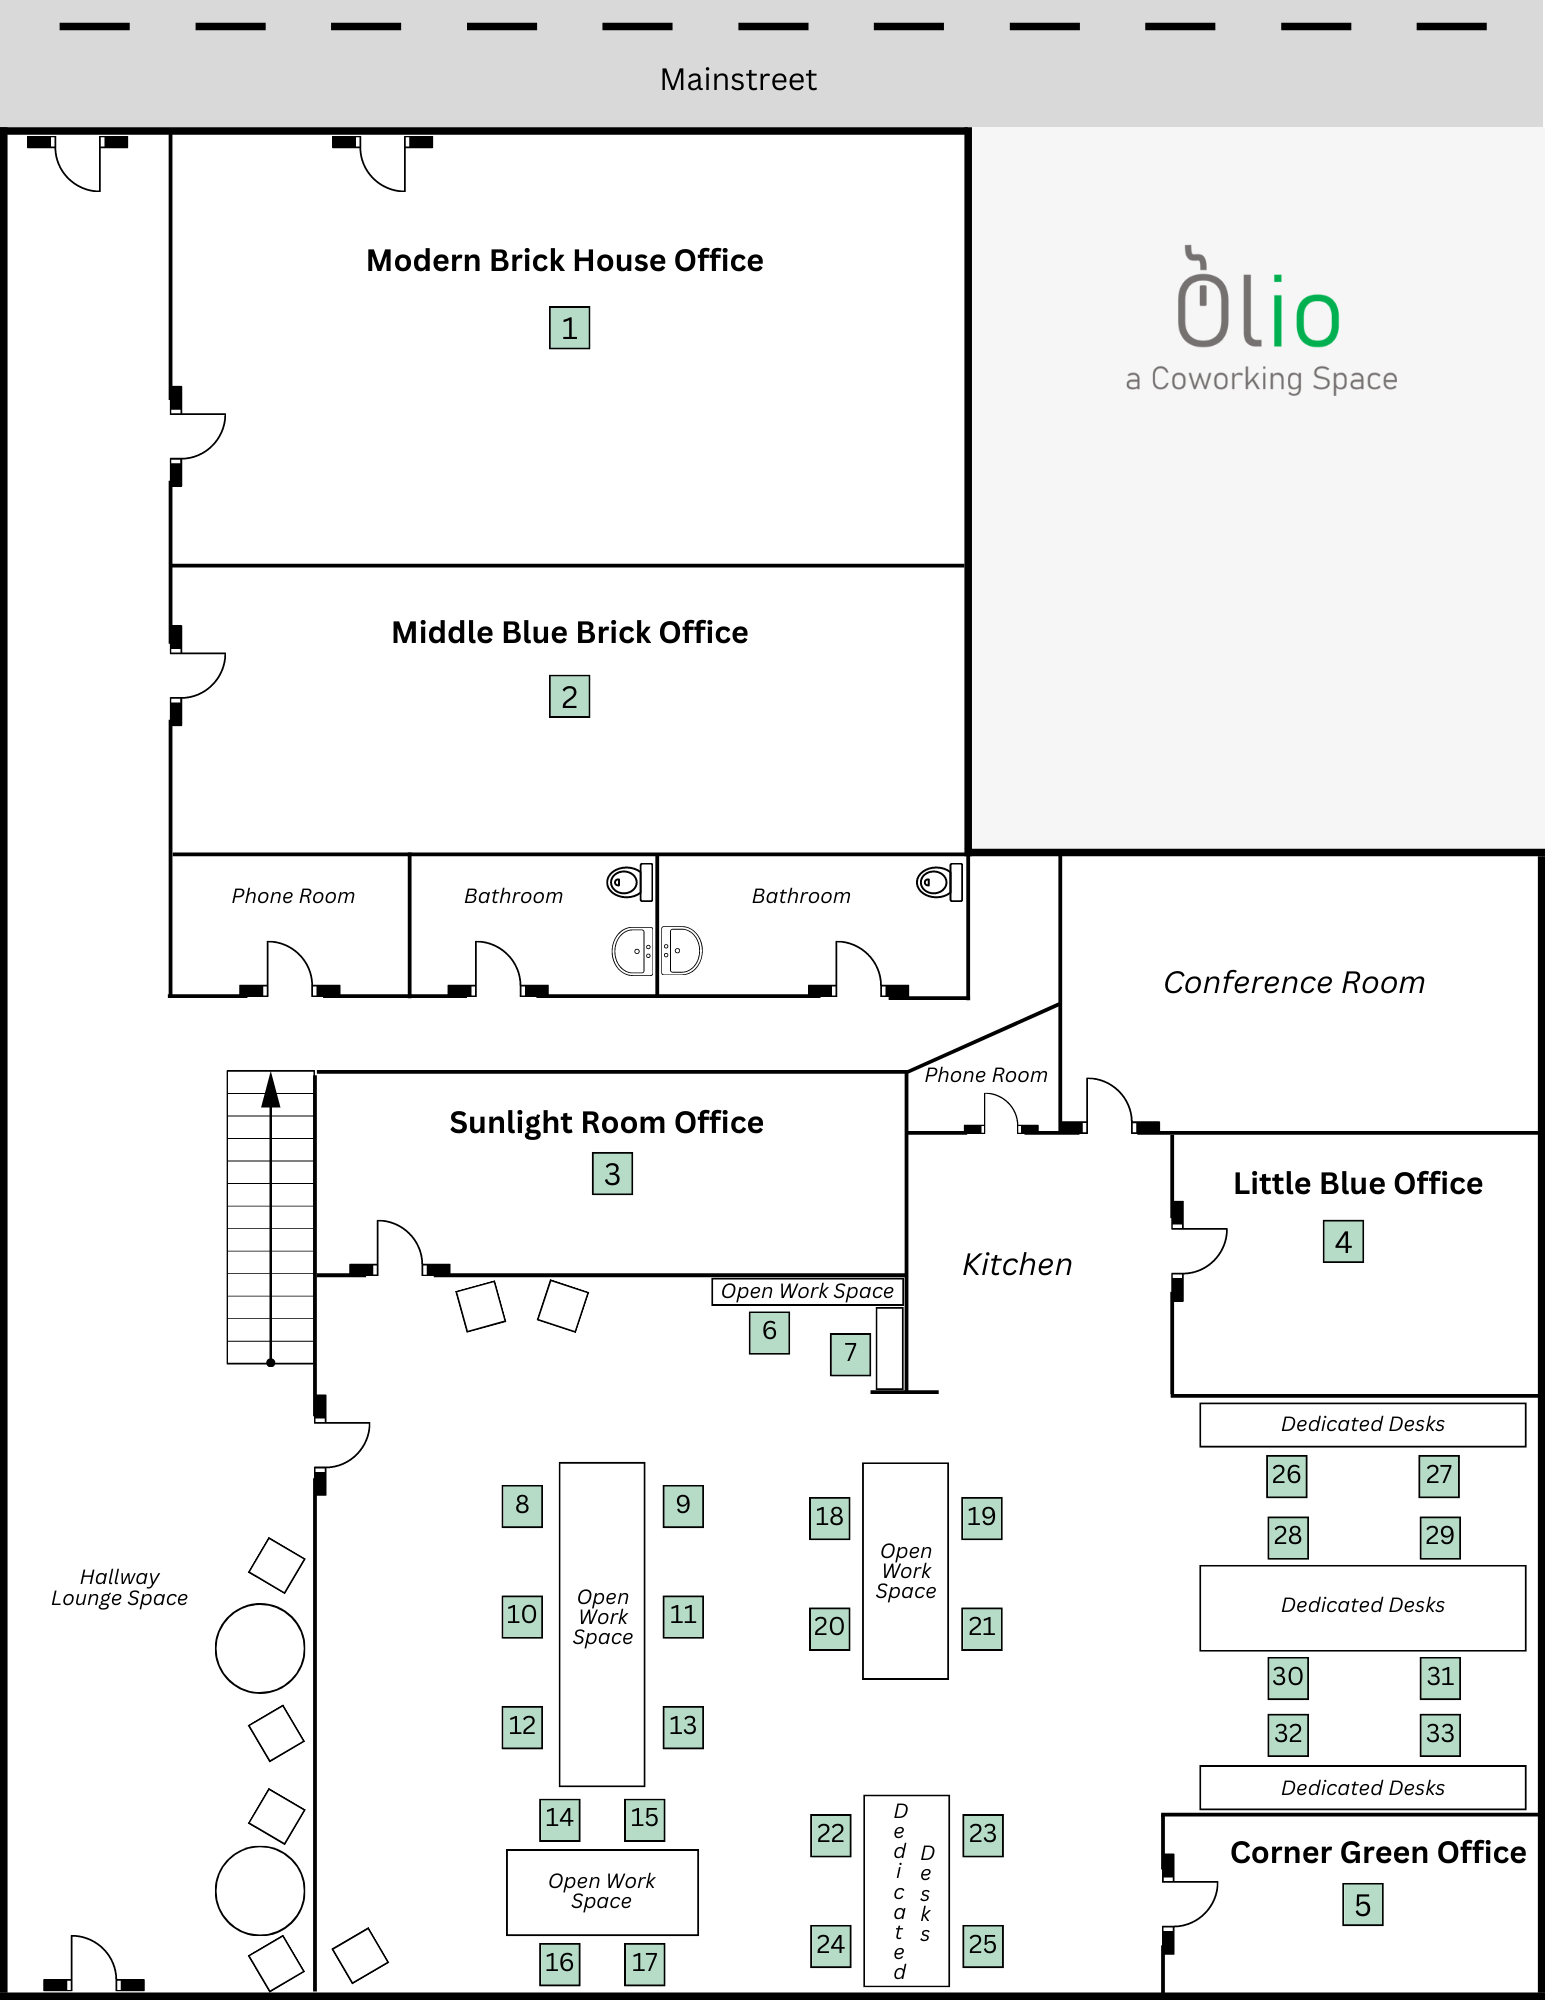 How to Start a Coworking Space: Olio Layout